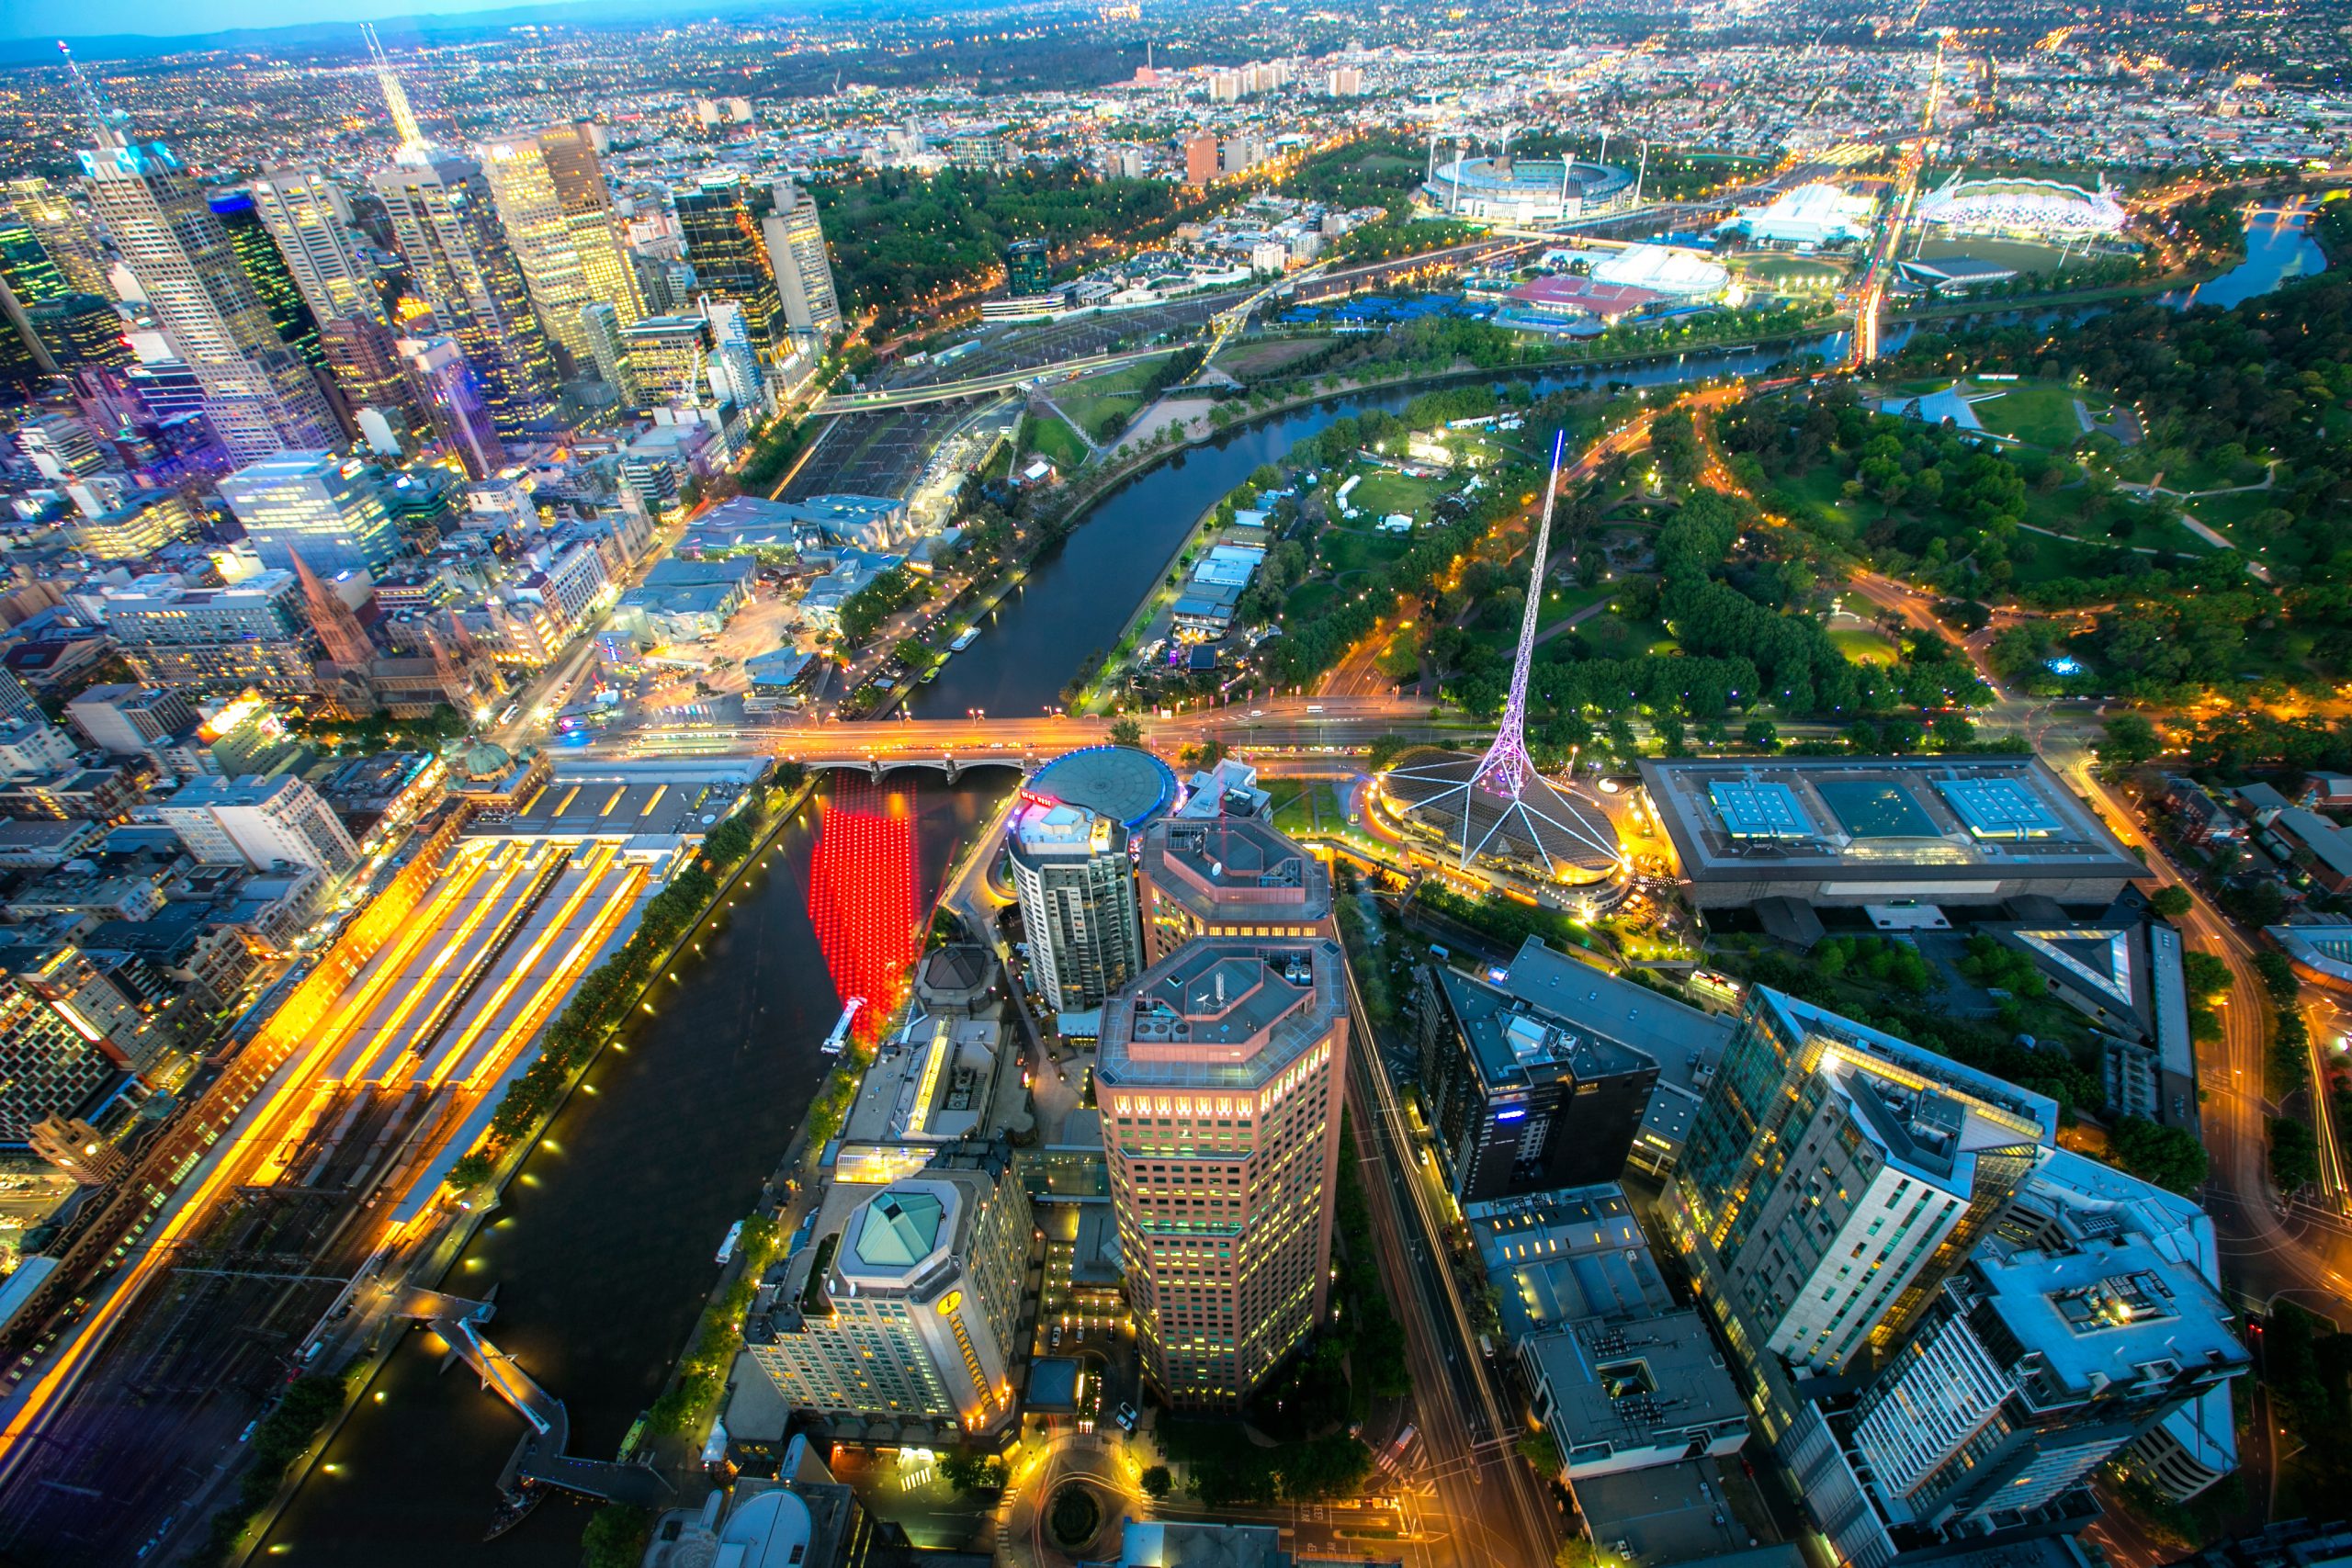 An aerial view of downtown Melbourne, Australia from inside the Eureka Skydeck.